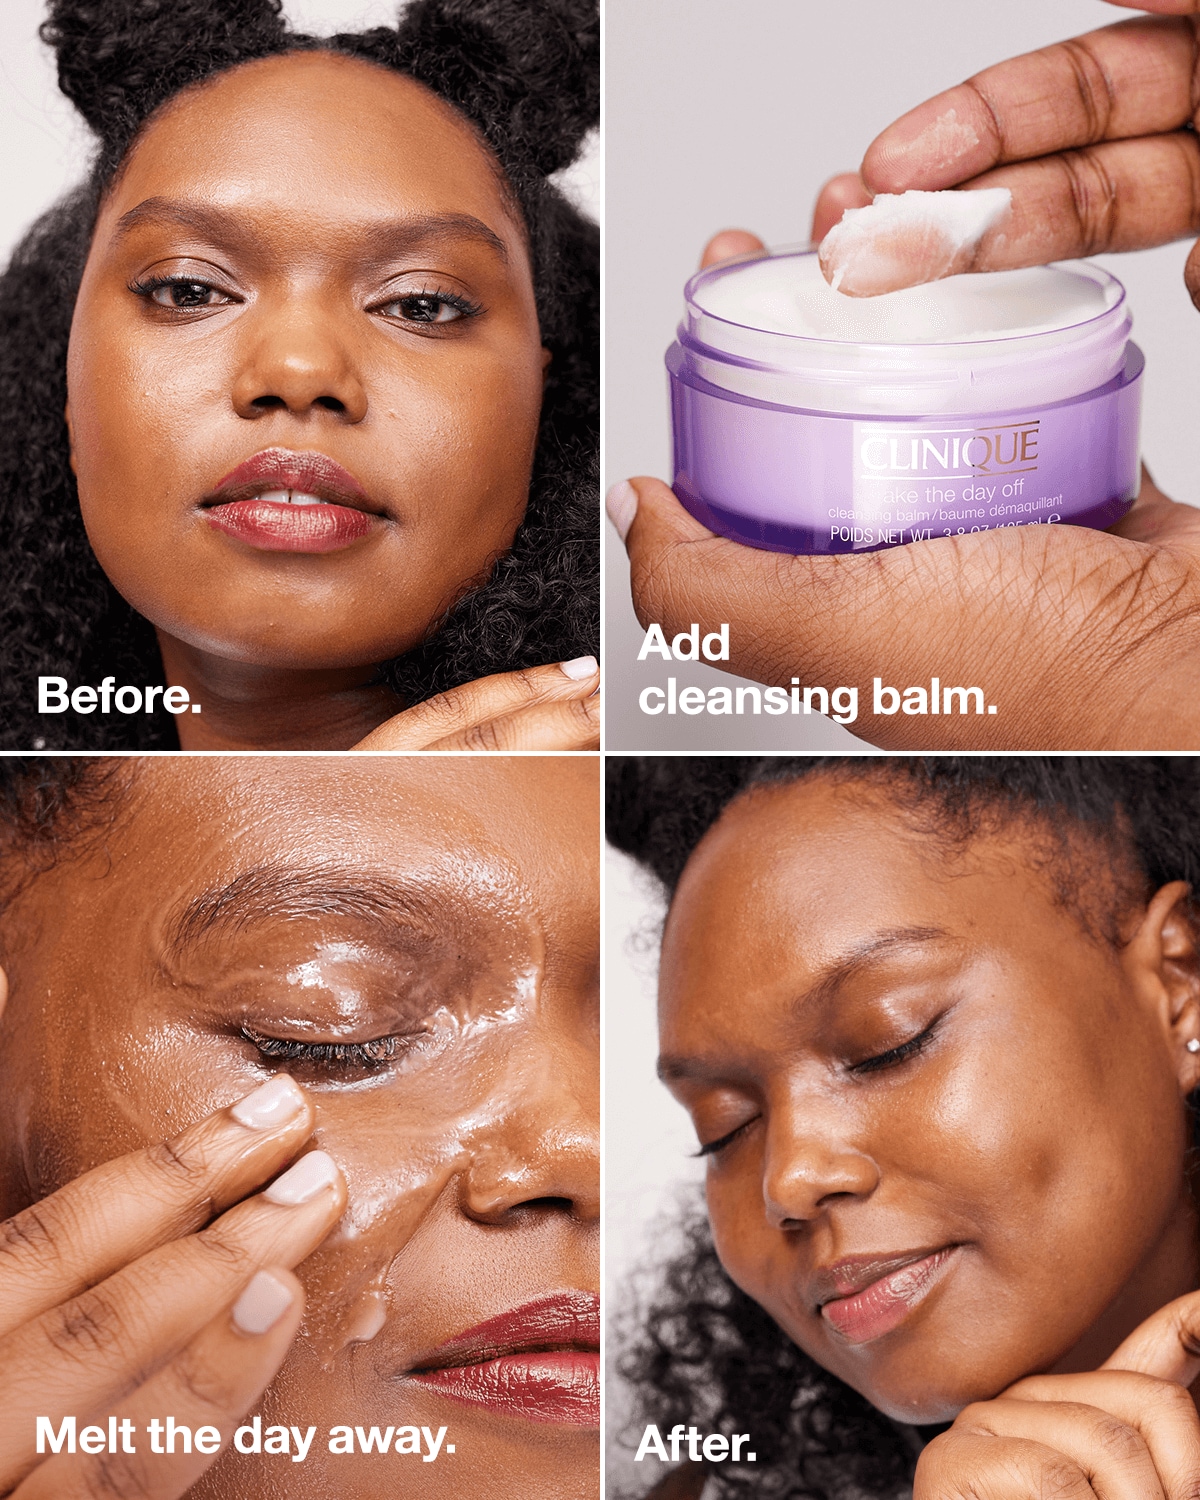 Remover Take Cleansing Off™ Clinique | Day Makeup Balm The